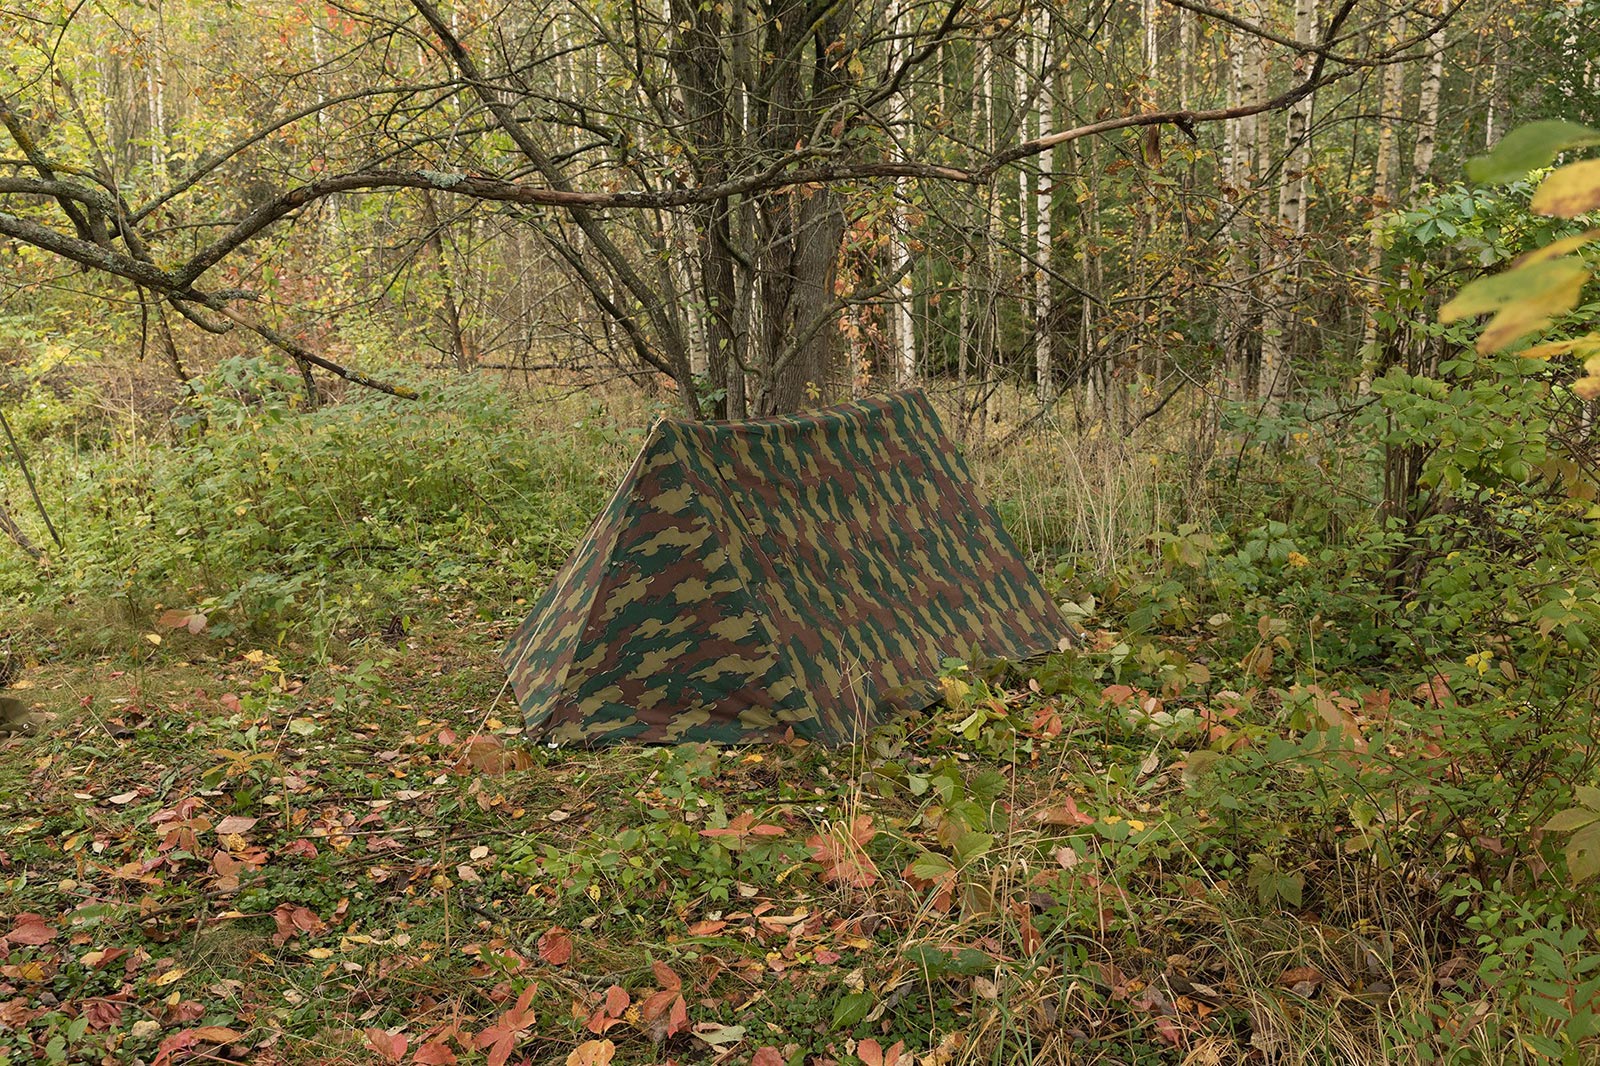 Belgian A-frame tent in the jigsaw camo